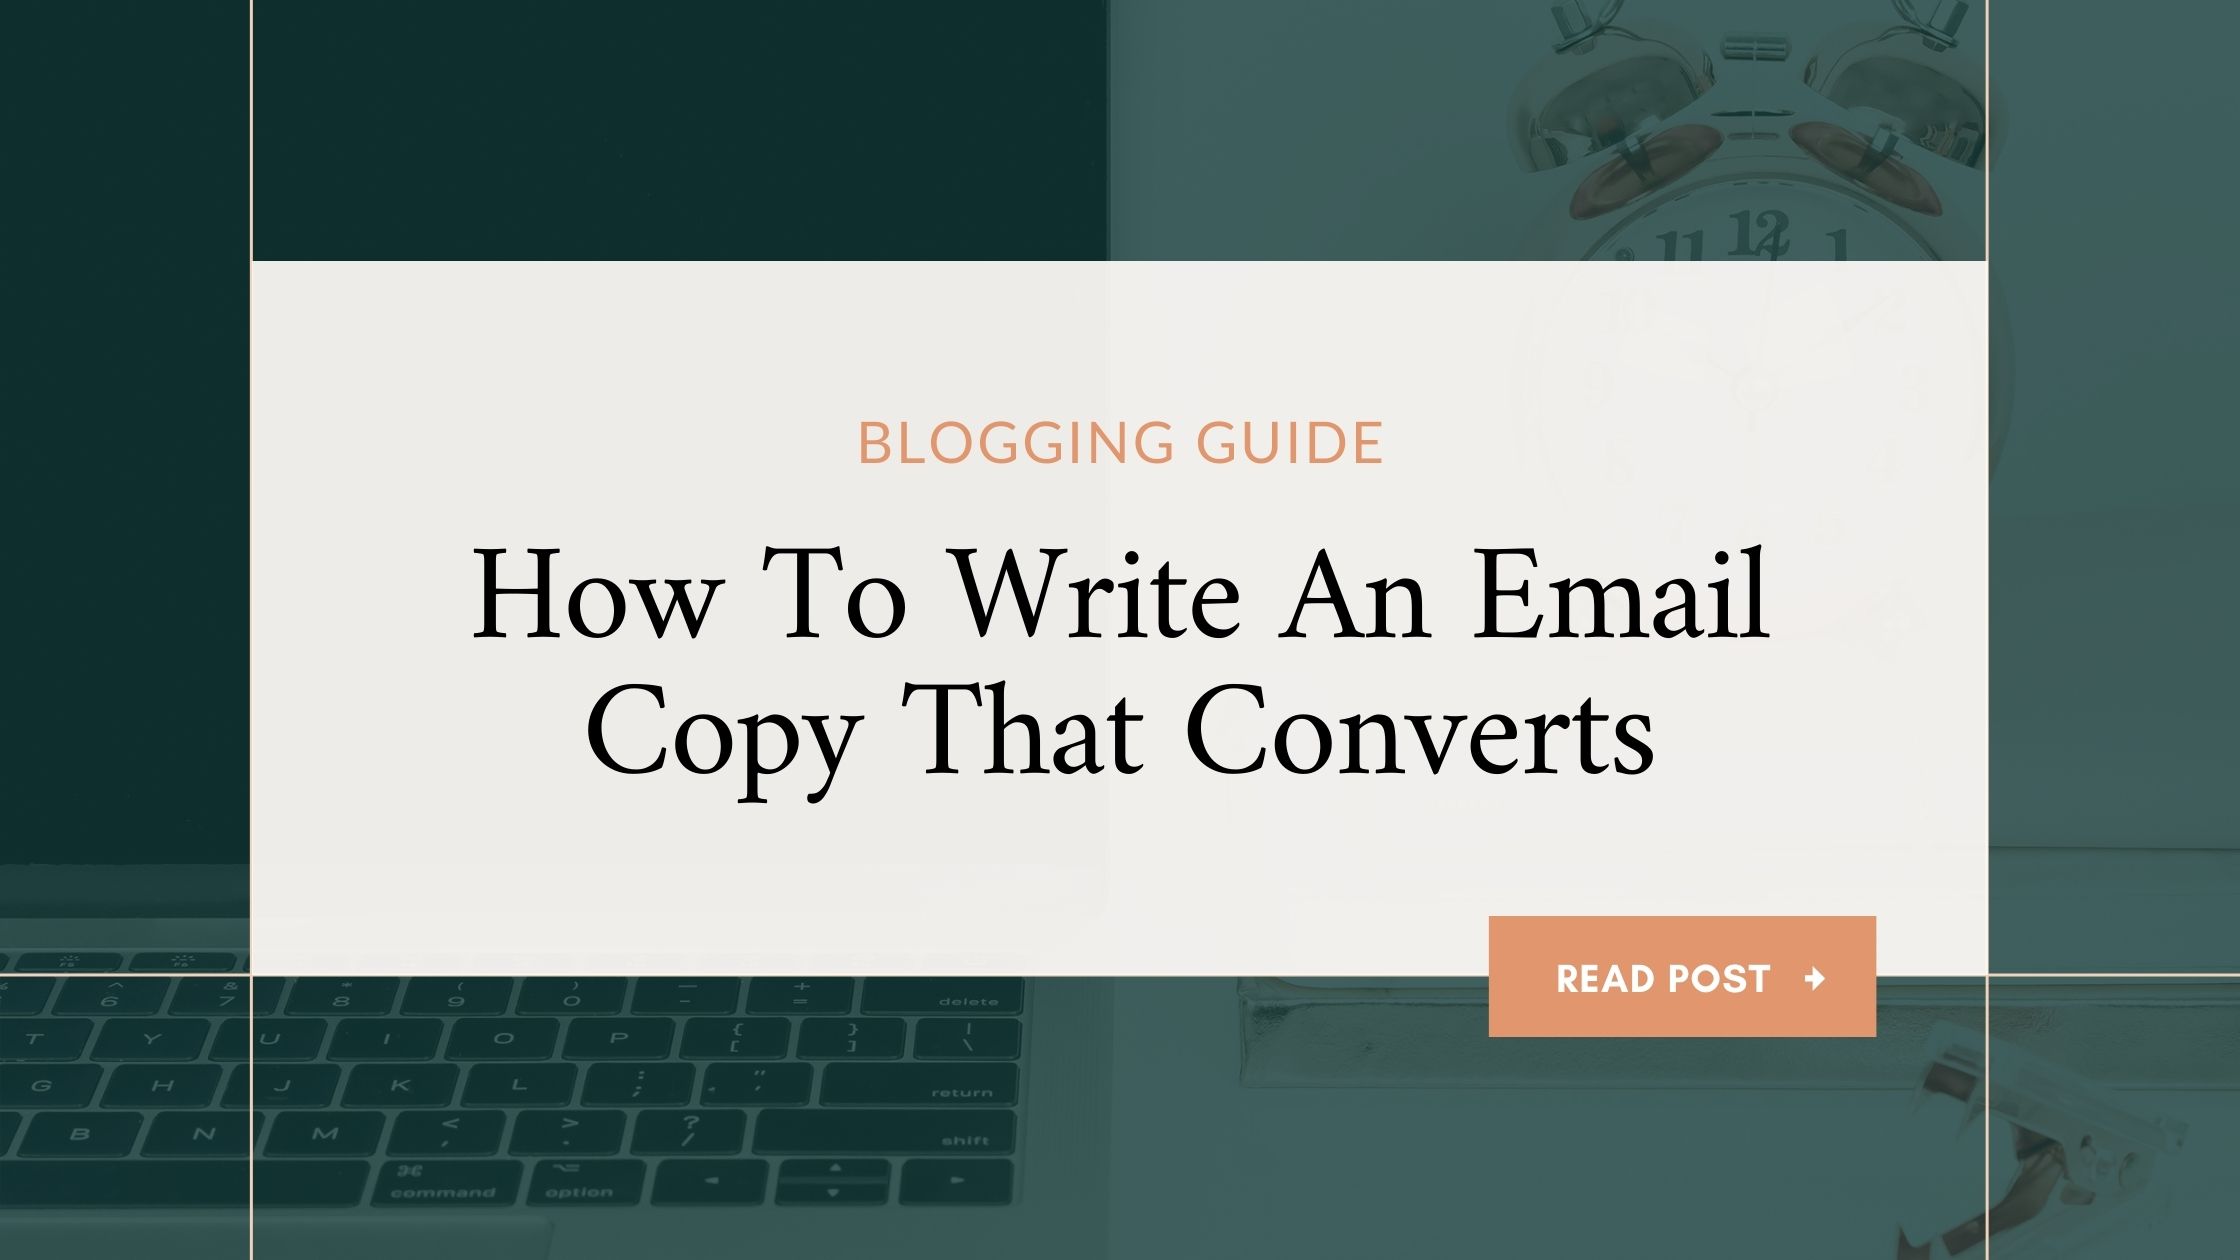 How To Write An Email Copy That Converts